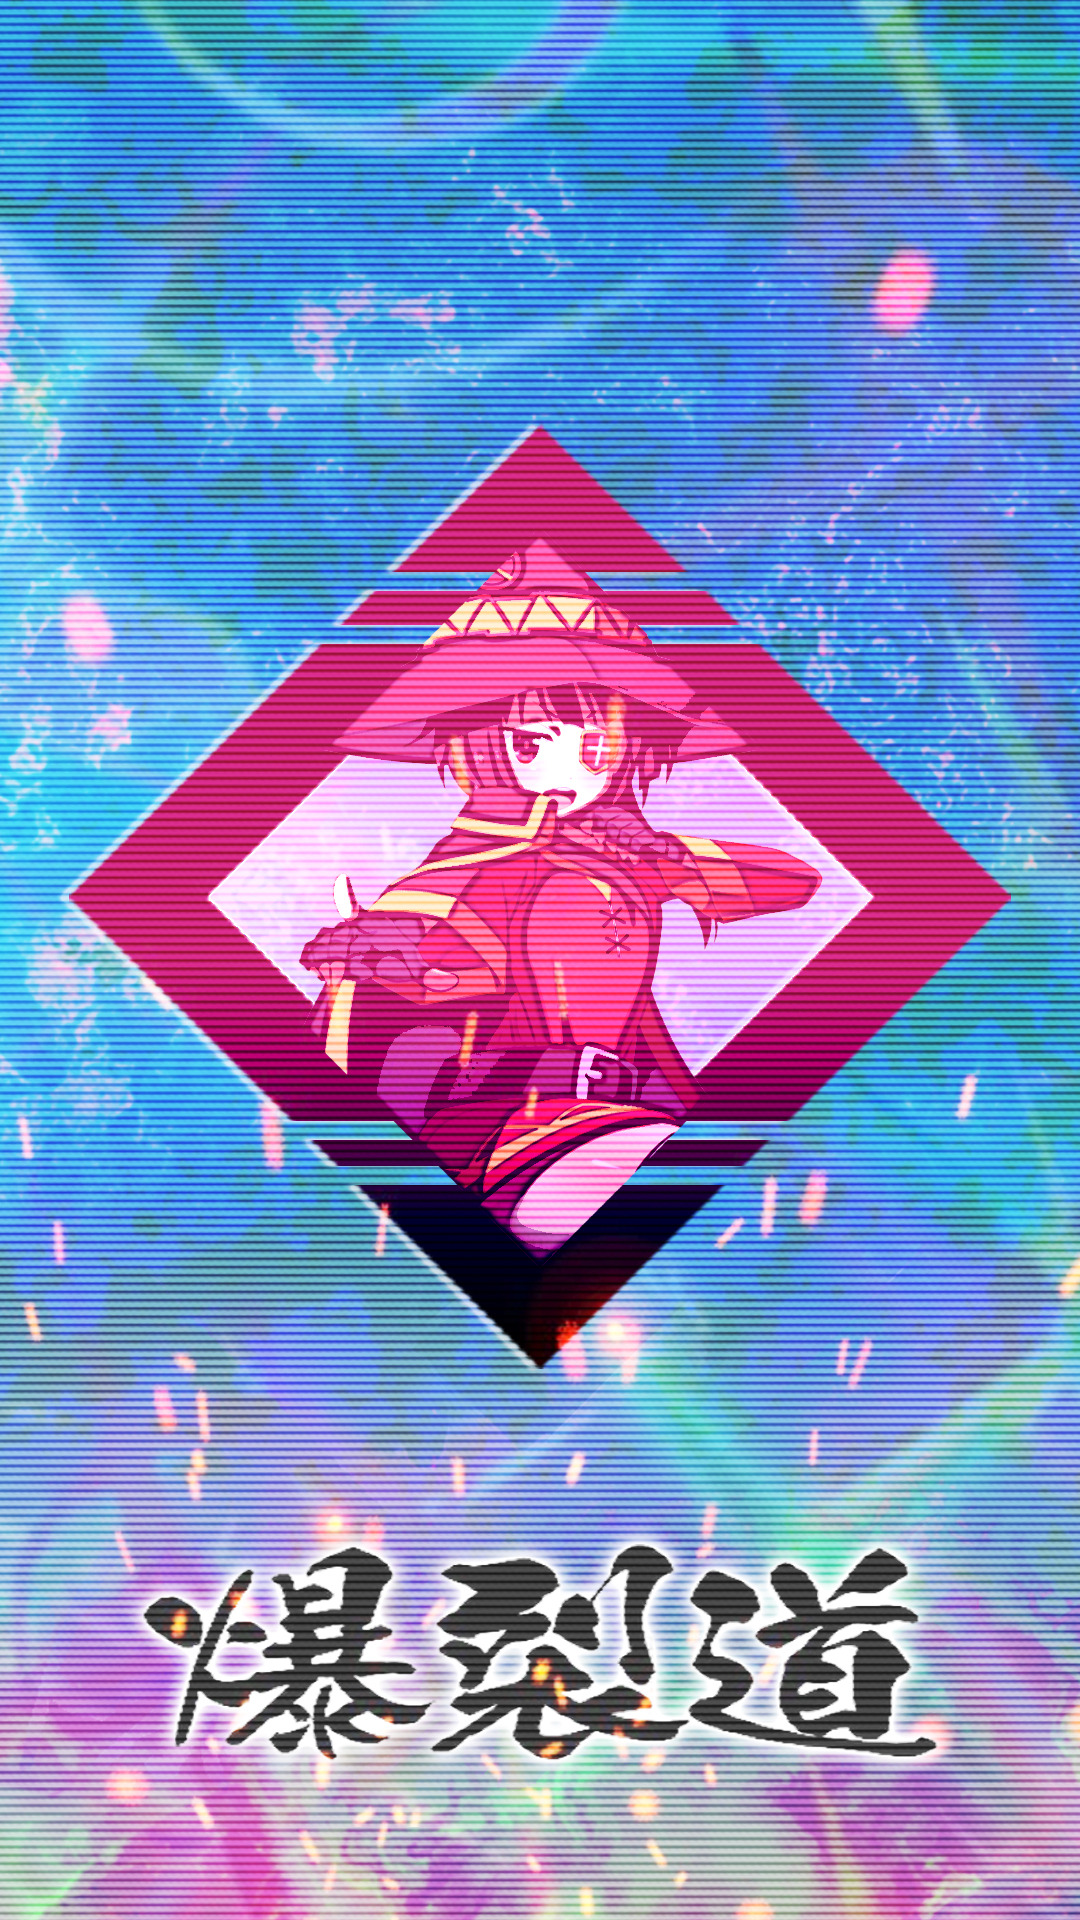 Phone Version Of The Meguwave Wallpaper Since Someone - Vaporwave Aesthetic  Anime Wallpaper Iphone - 1080x1920 Wallpaper 